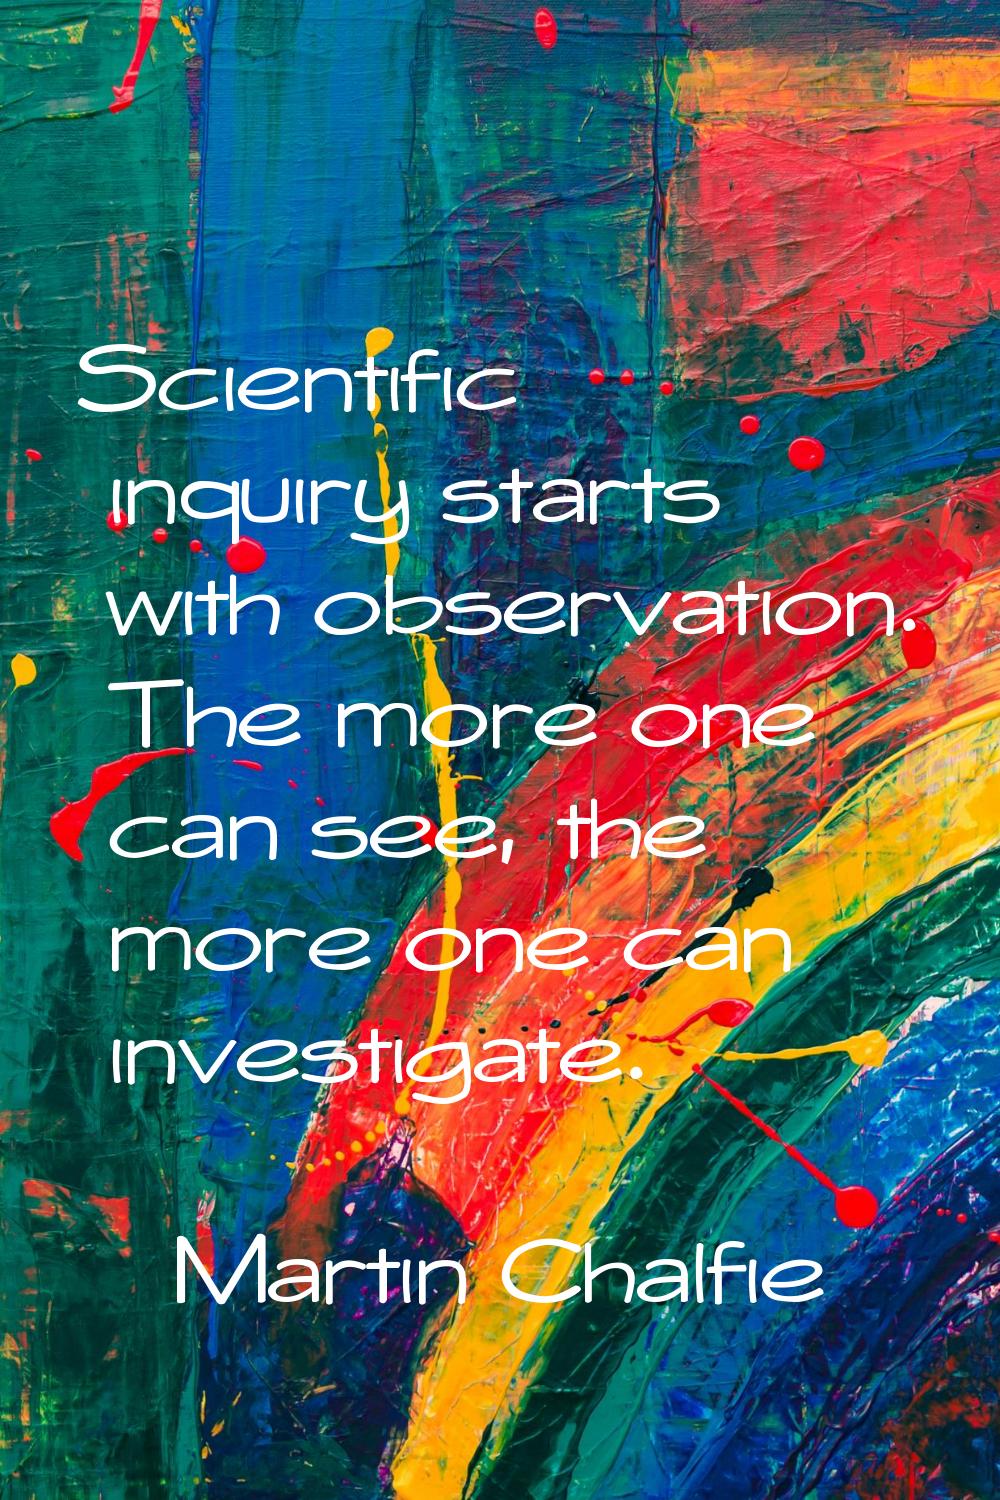 Scientific inquiry starts with observation. The more one can see, the more one can investigate.